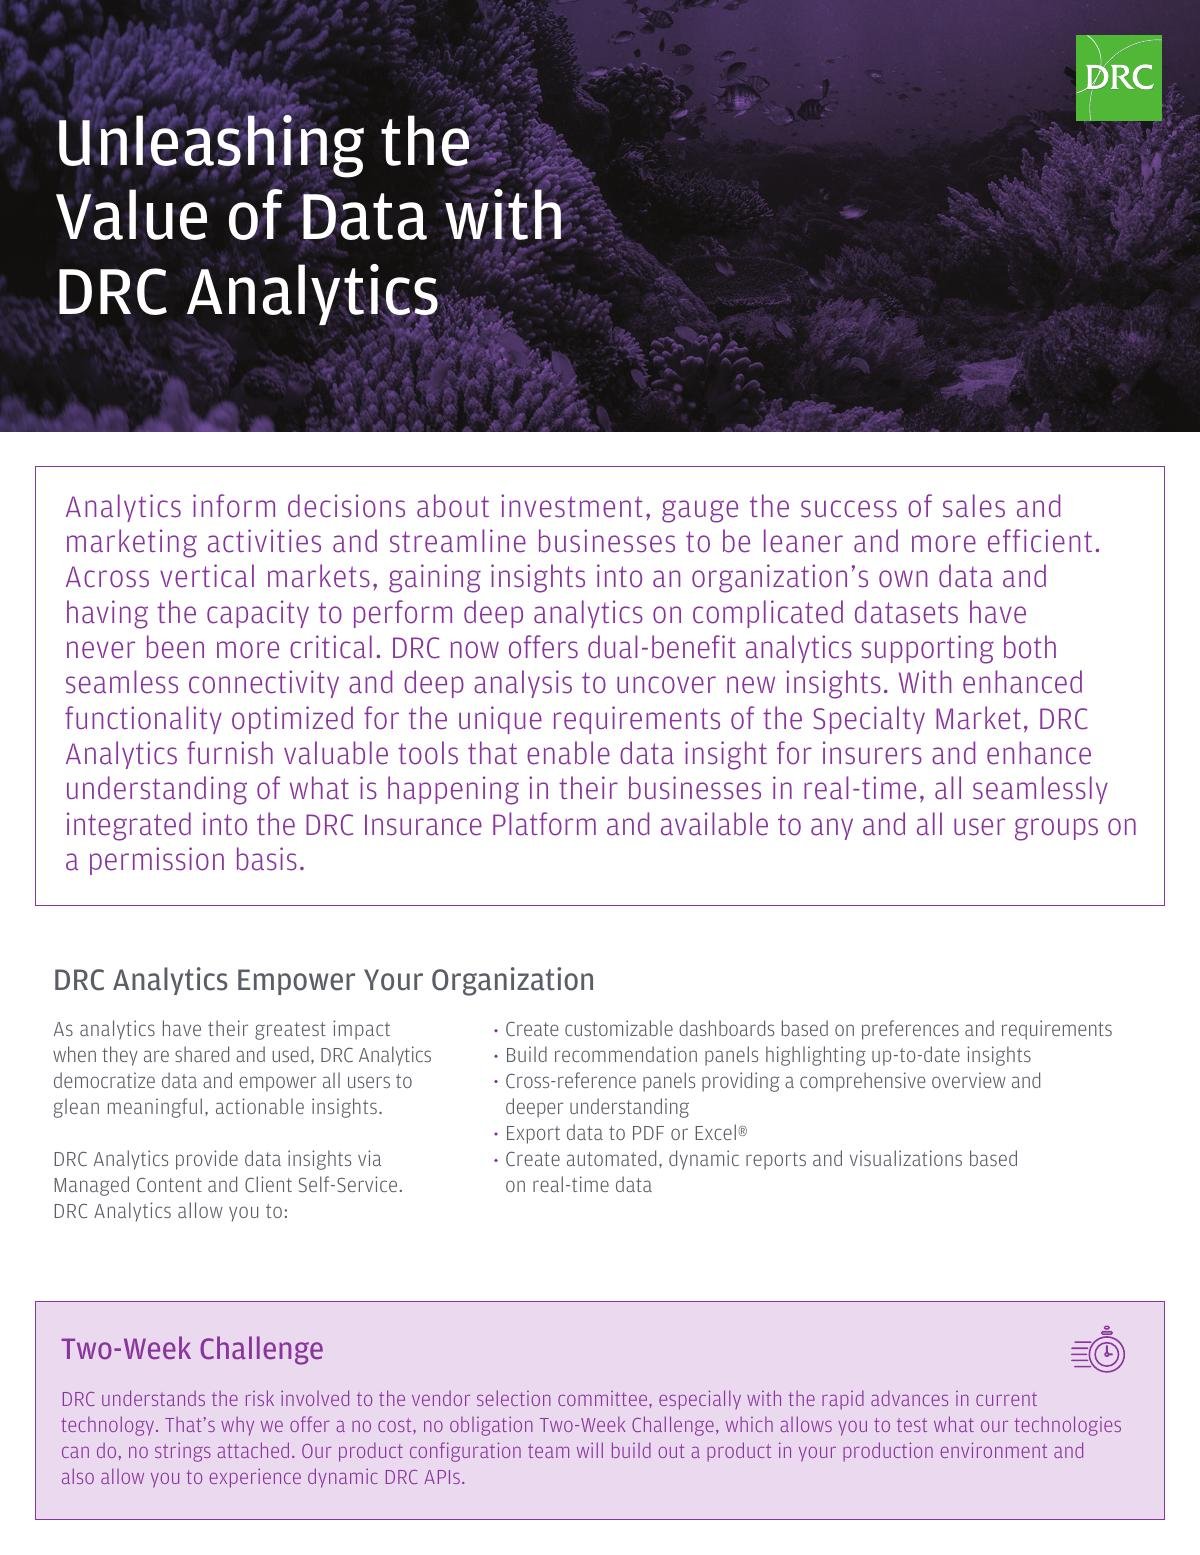 Unleashing the Value of Data with DRC Analytics